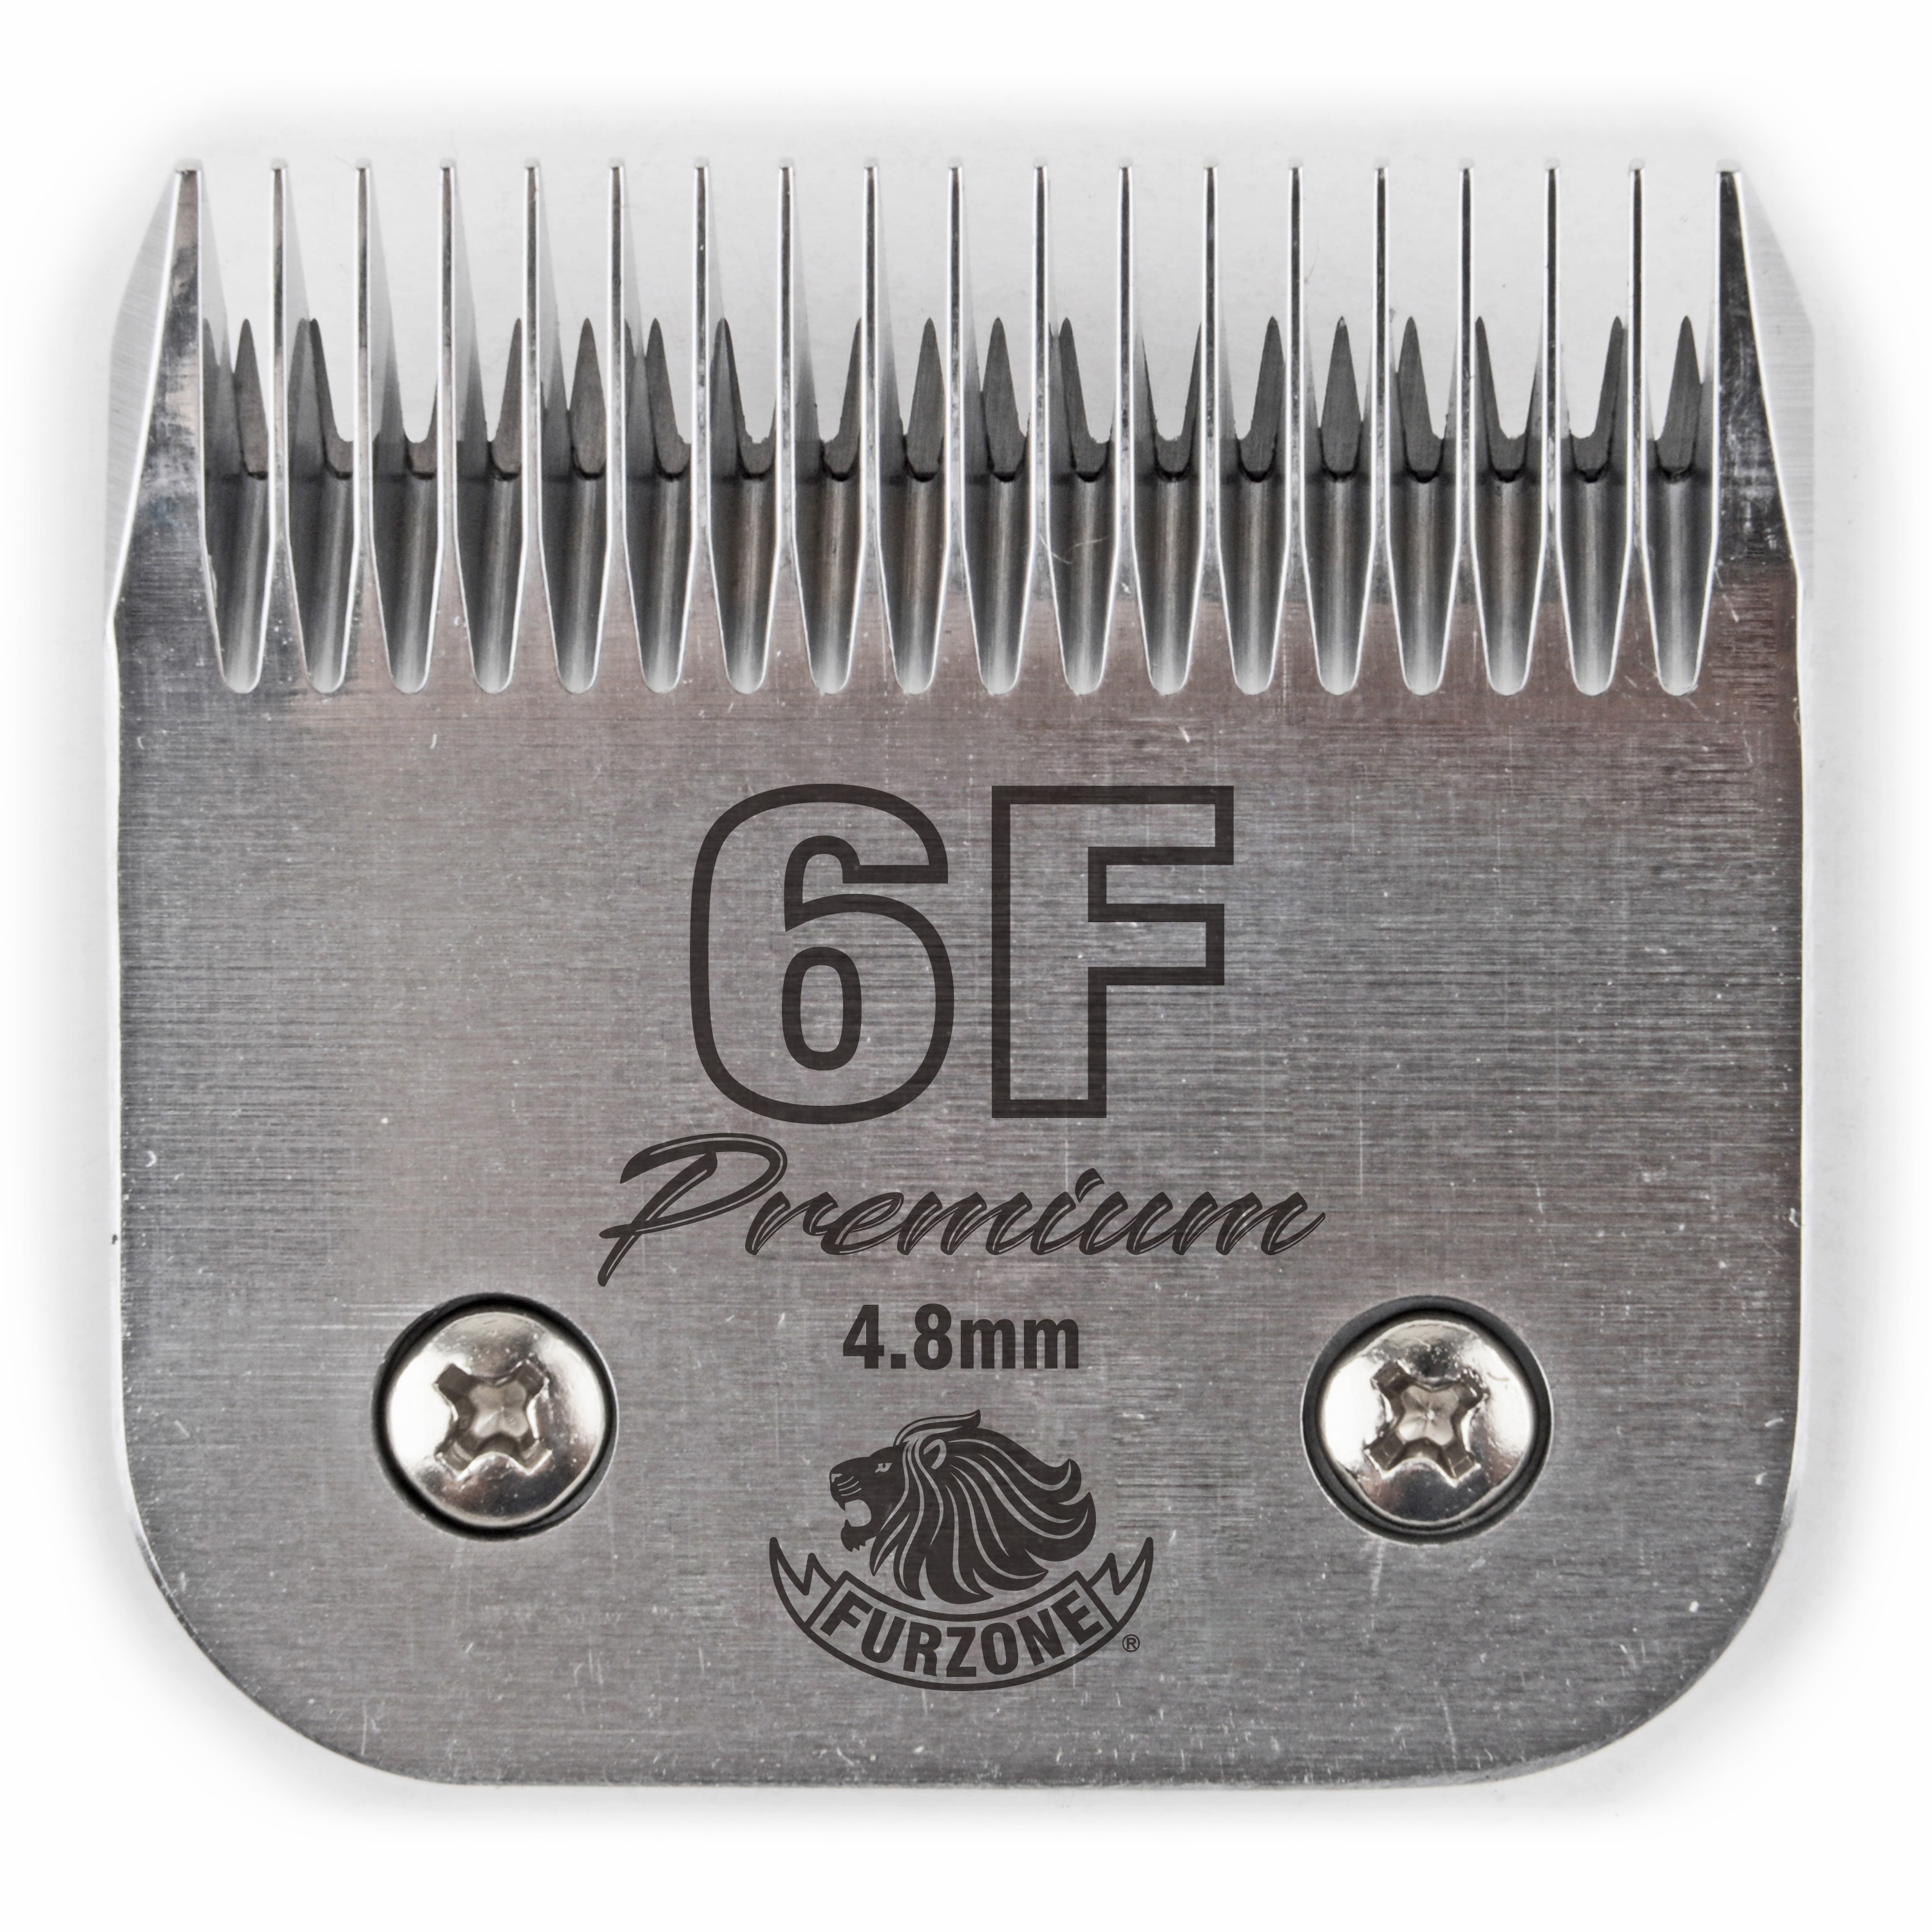 Furzone #6F-4.8mm-Full Teeth Professional A5 Detachable Blade - Made Of Extra Durable Japanese Steel